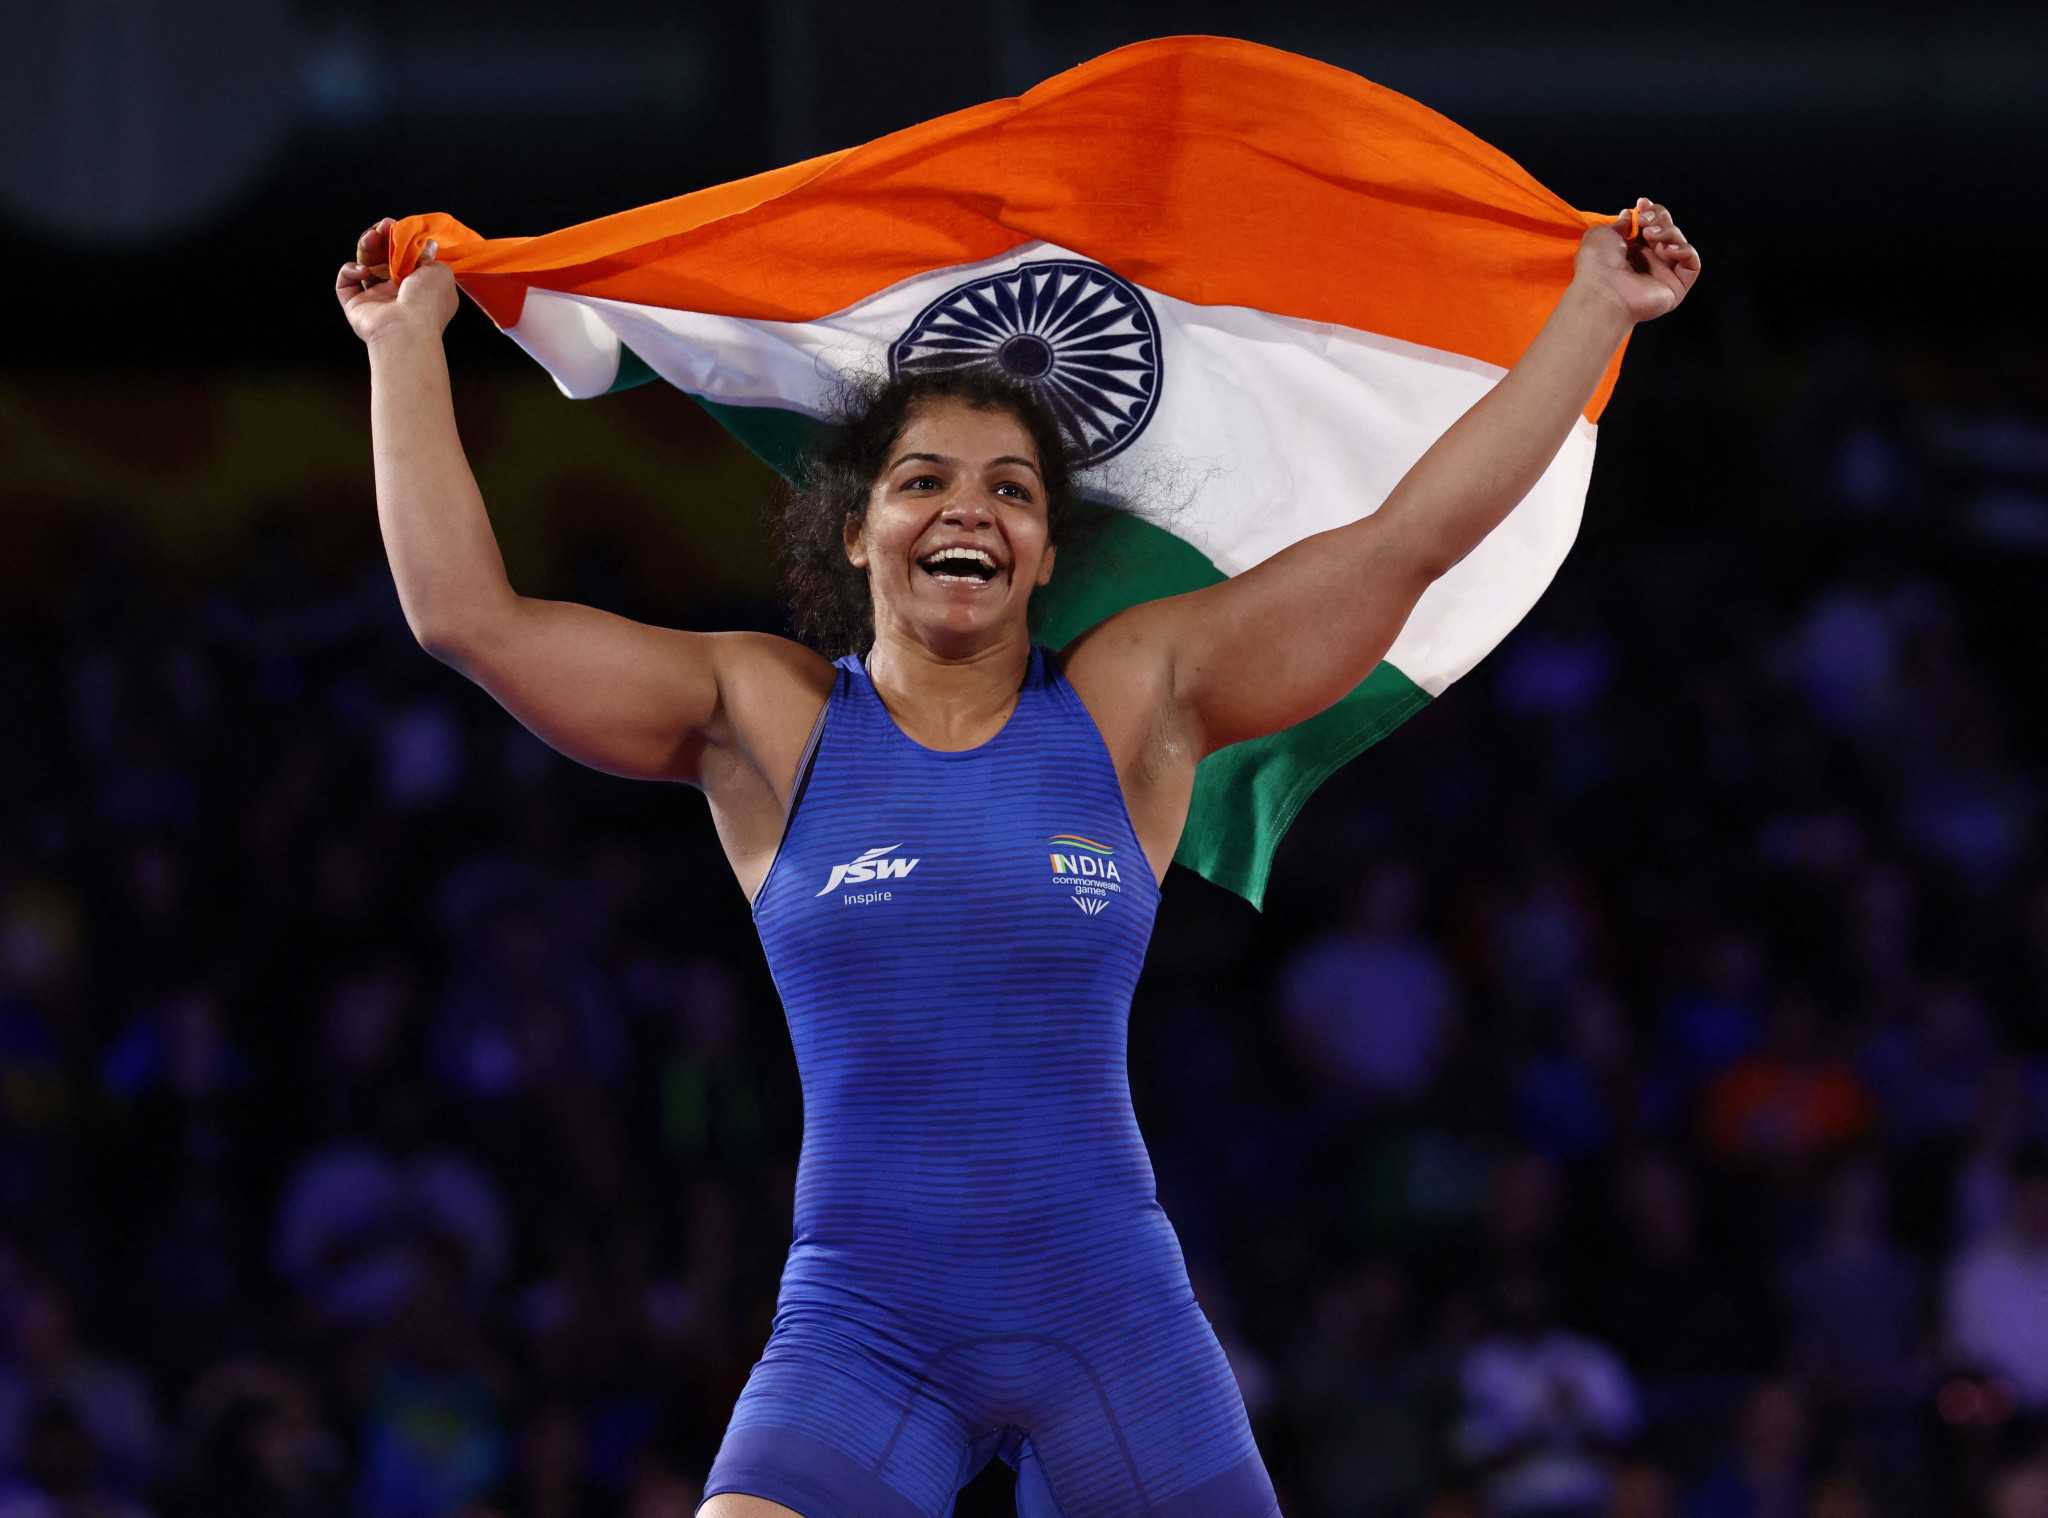 Malik warns protesting Indian wrestlers will skip Asian Games if issues unresolved